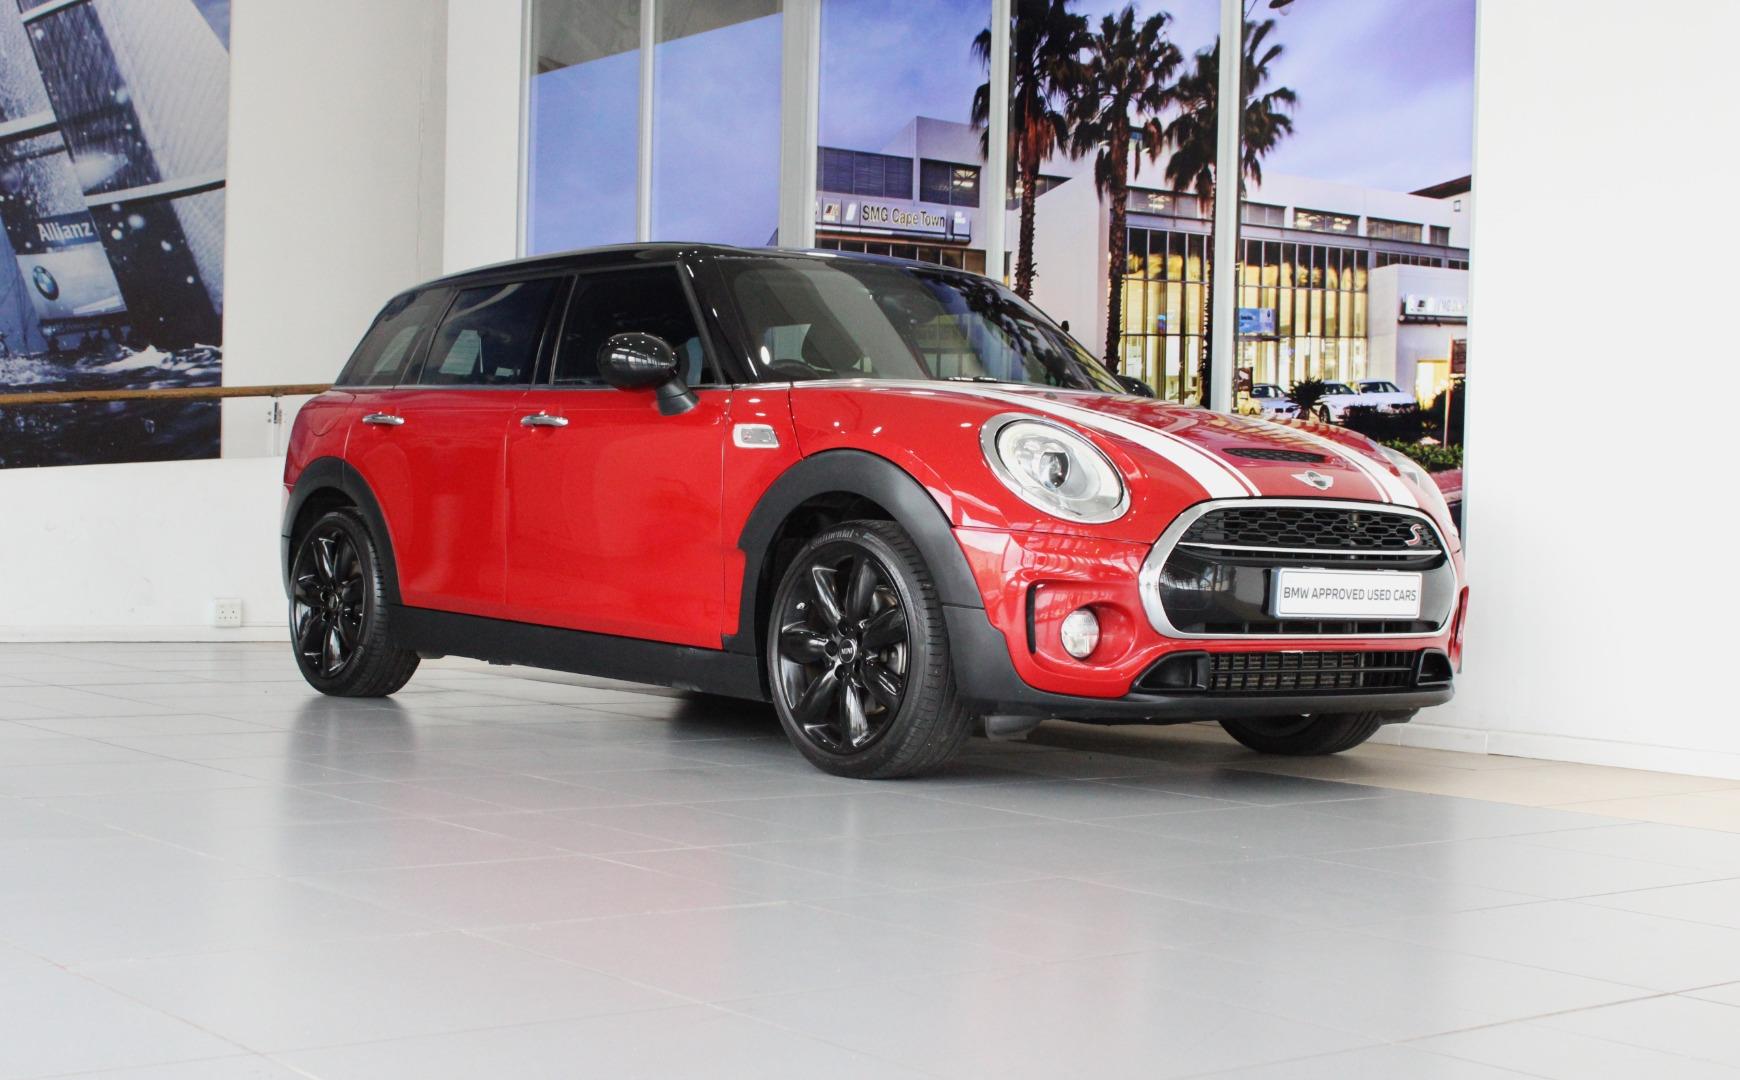 2016 MINI COOPER S CLUBMAN A/T  for sale - SMG12|USED|115286